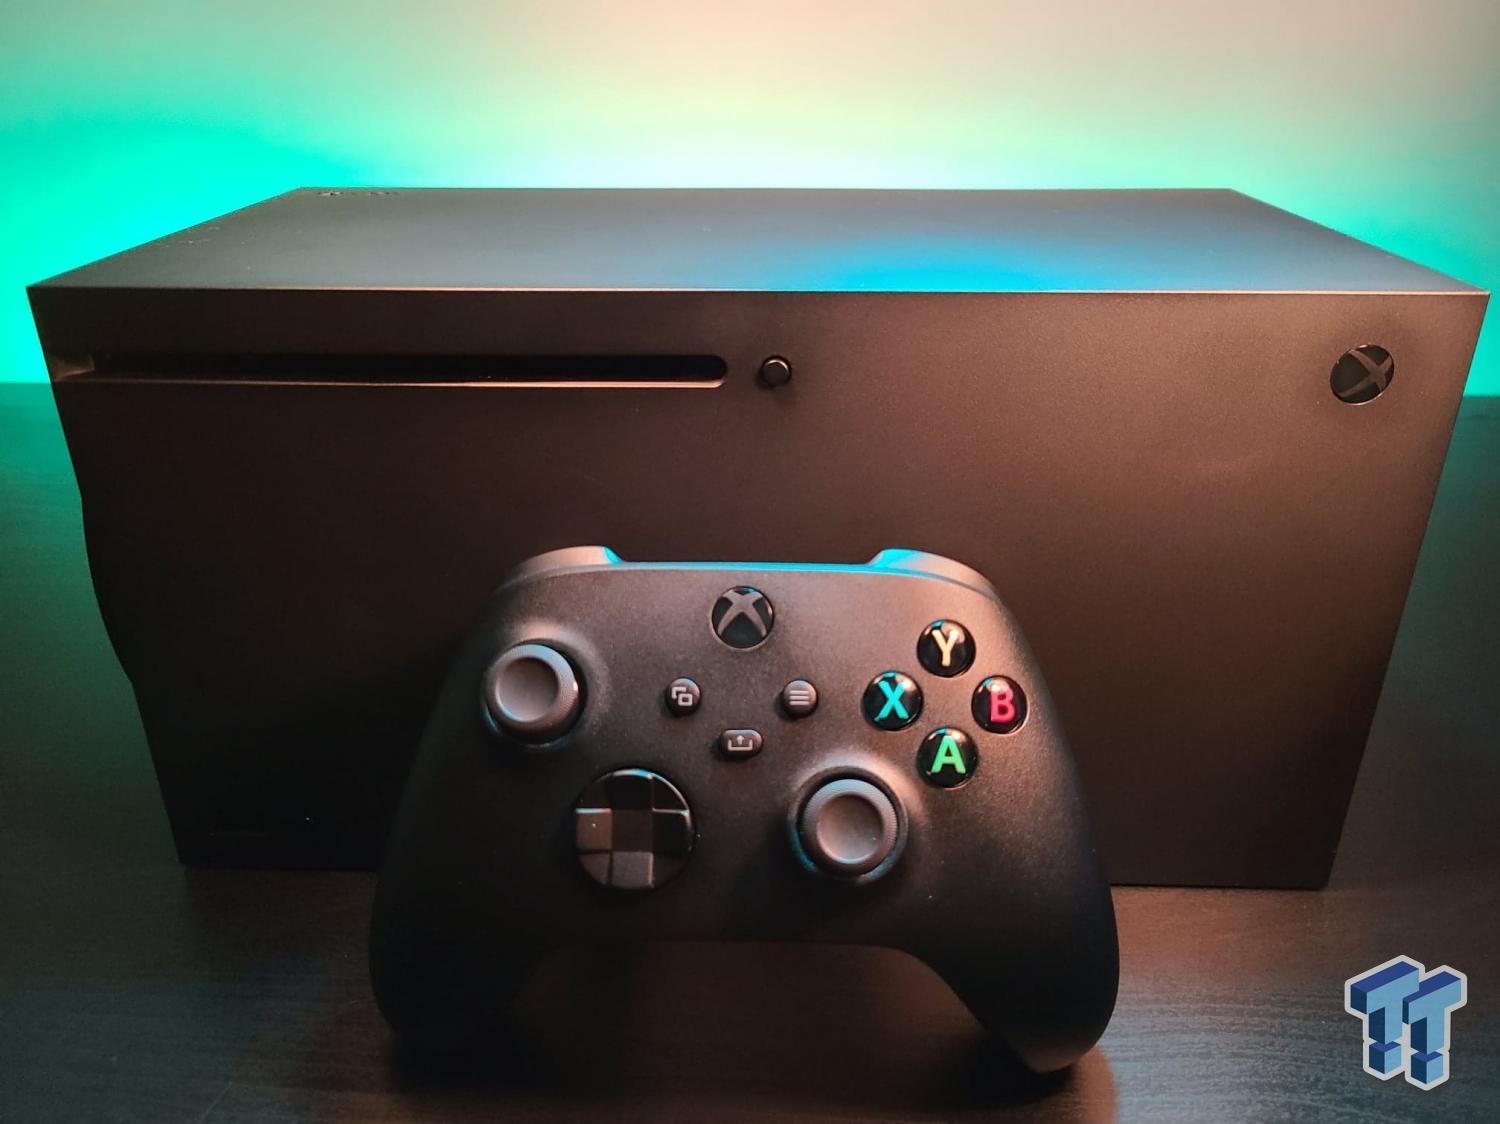 Power Your Dreams with Xbox Series X, Available Holiday 2020 - Xbox Wire